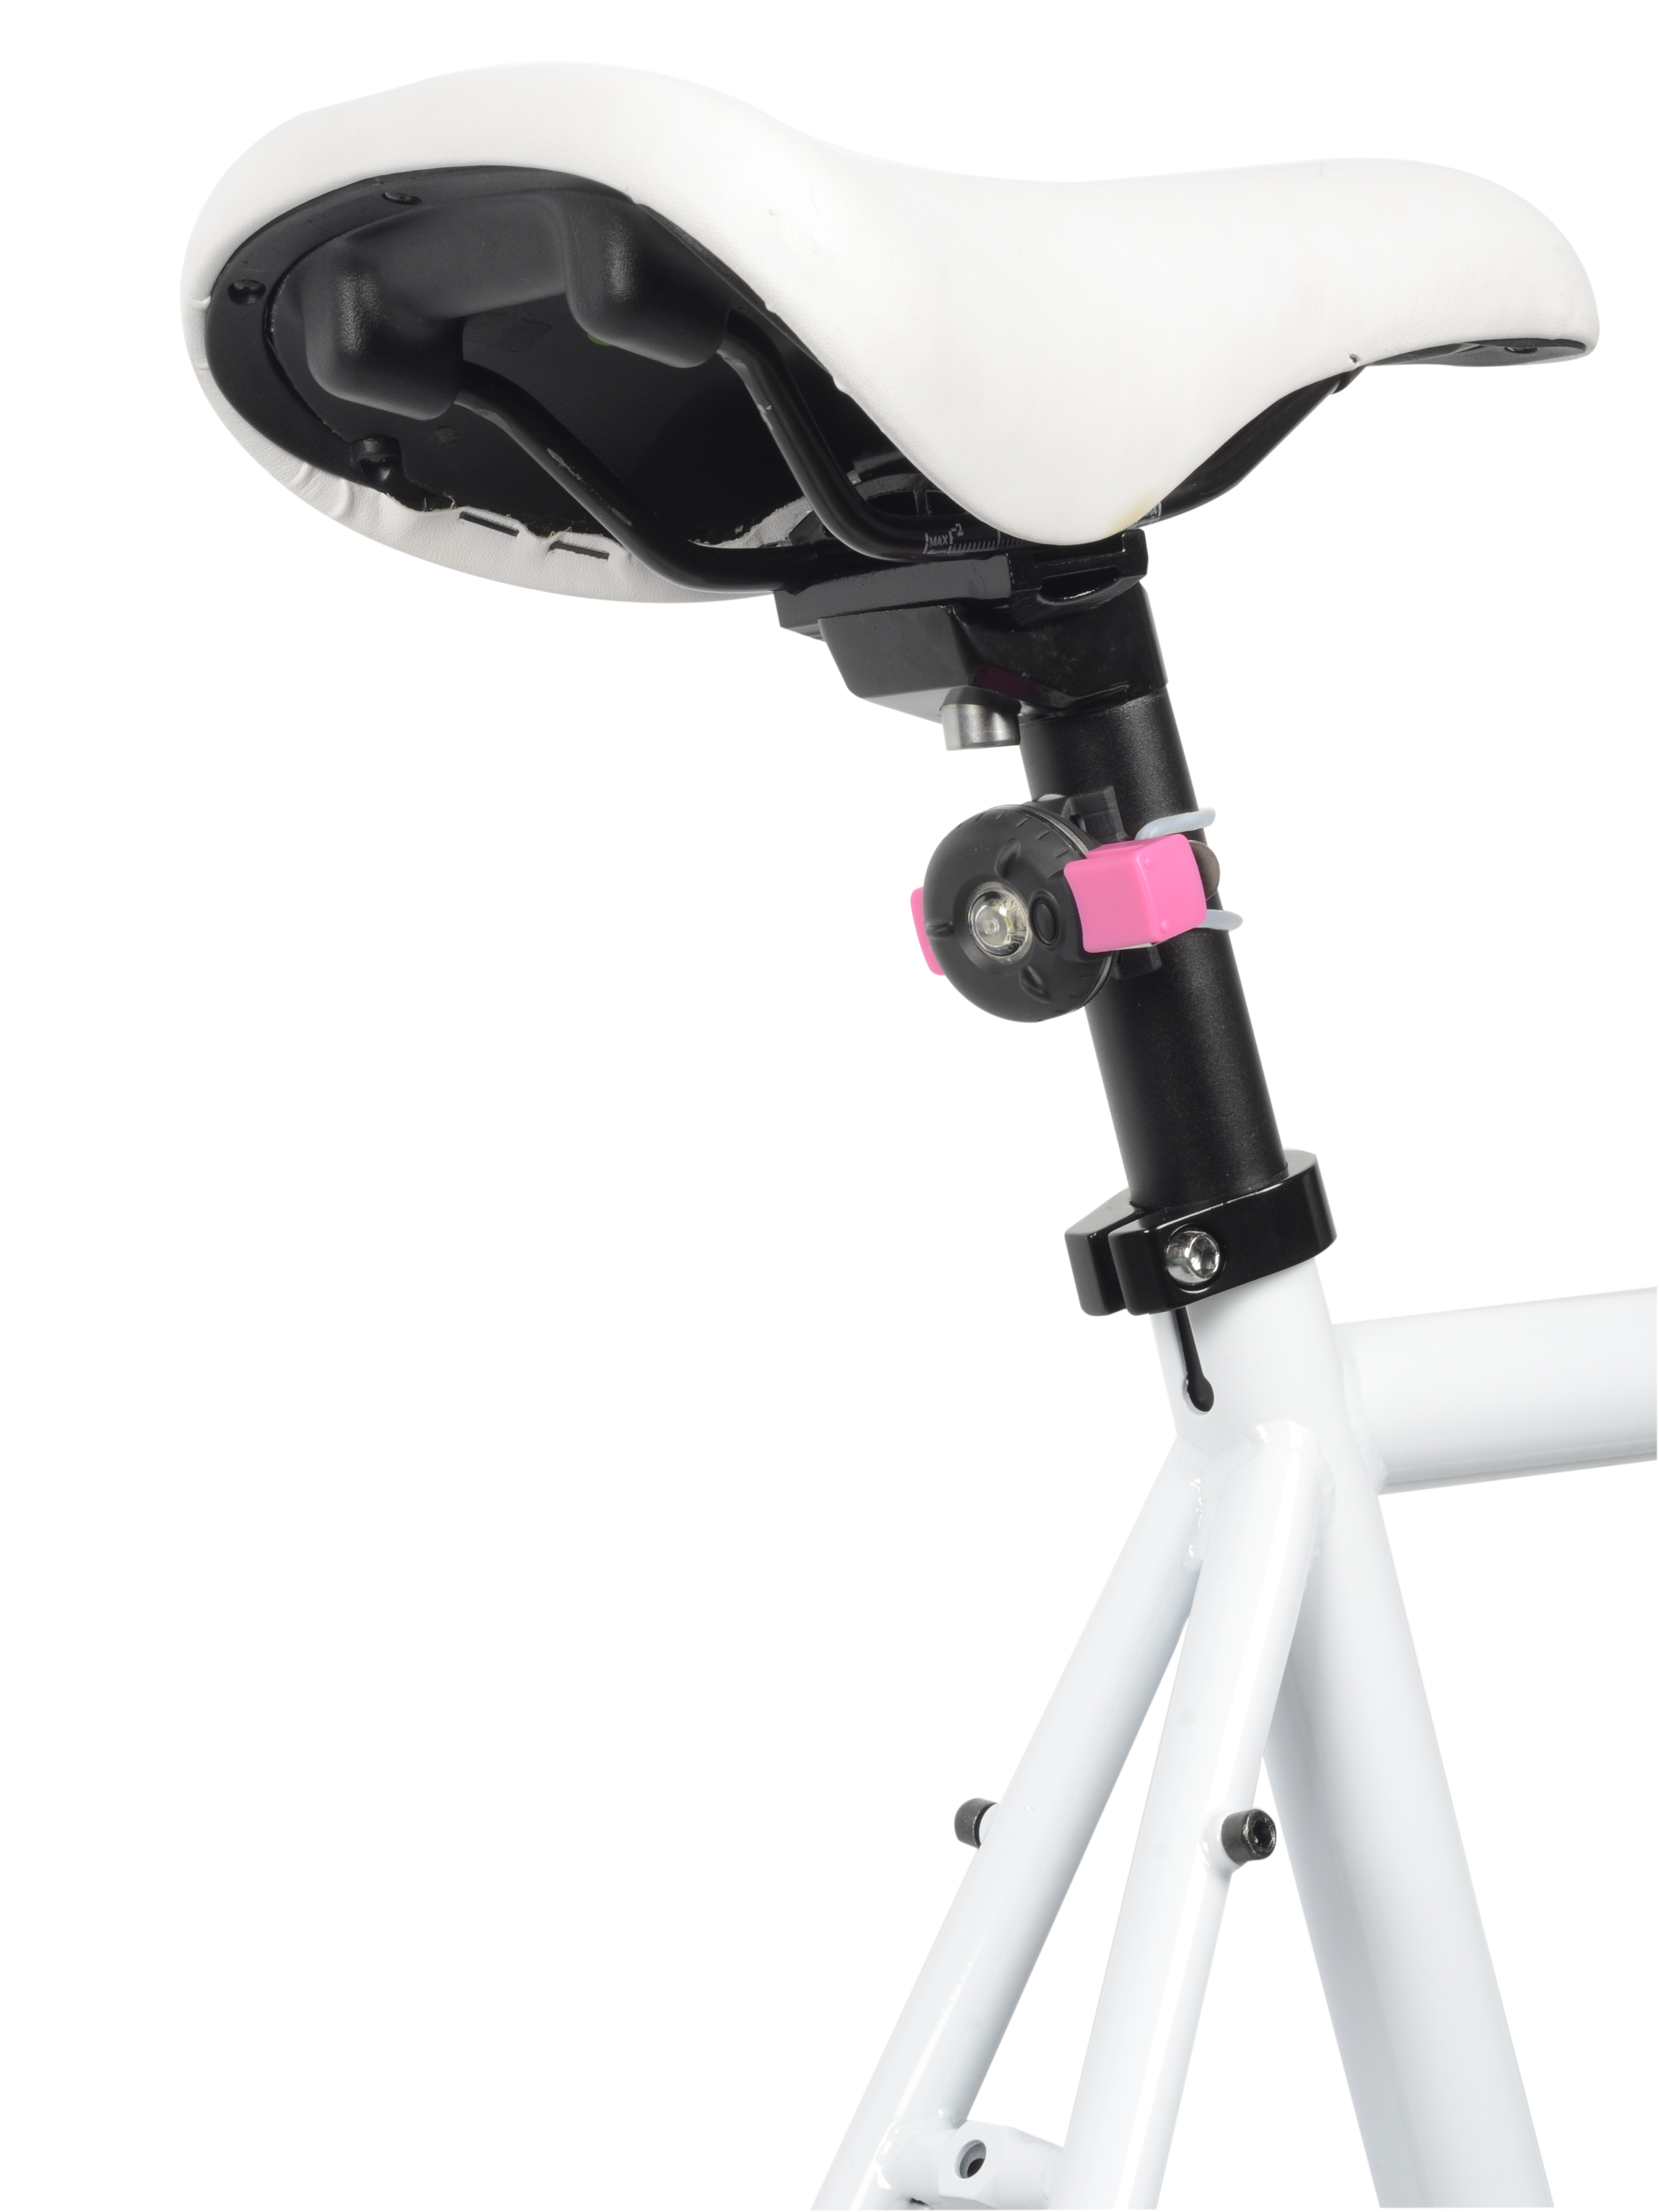 The included mount easily connects the Bkin to various positions on a bicycle, including underneath seats.